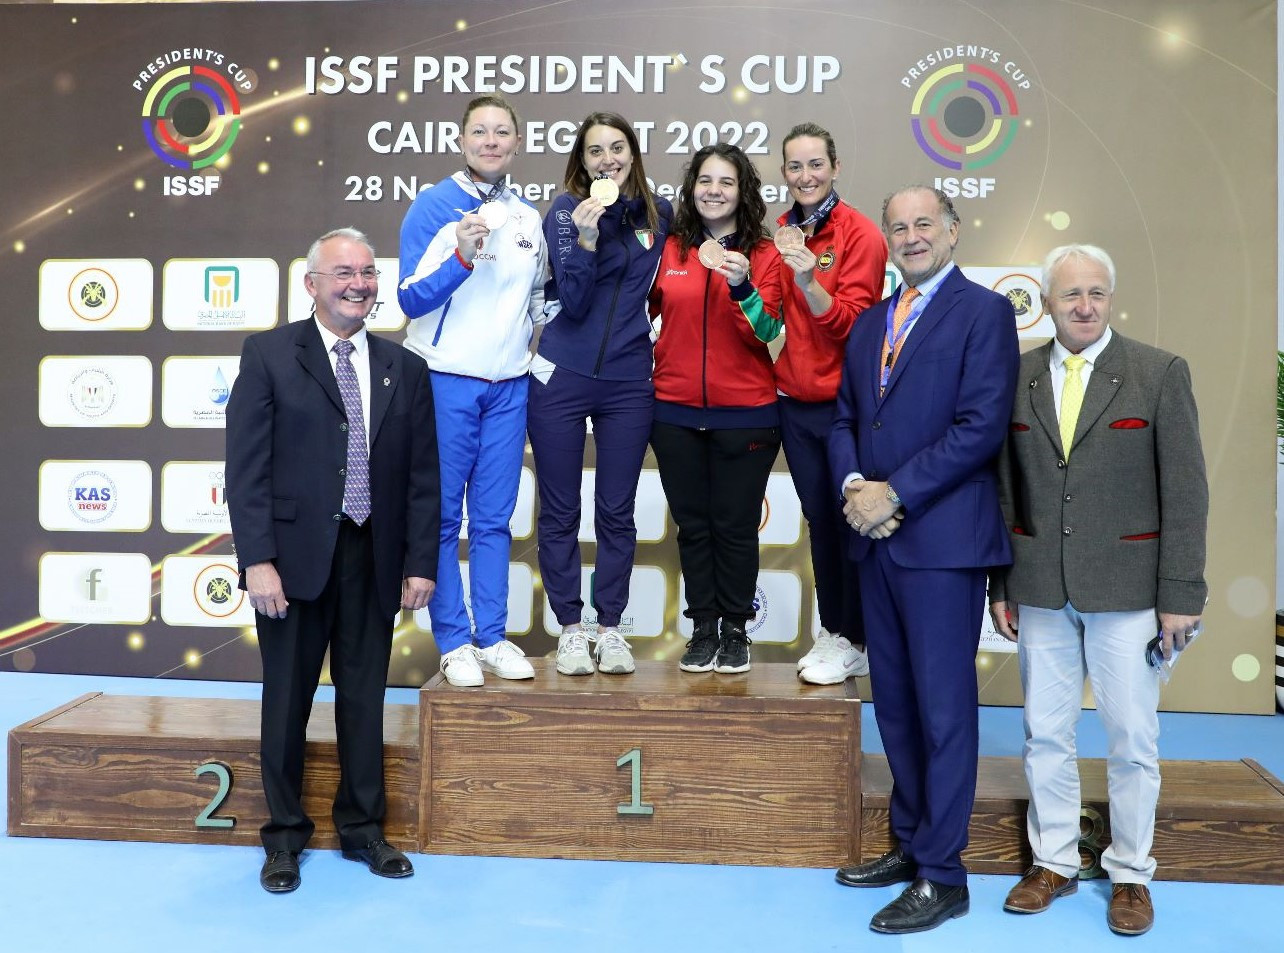 Vladimir Lisin has failed to fulfil a promise to provide prize money for the ISSF President's Cup in Cairo after being ousted as the governing body's President ©ISSF